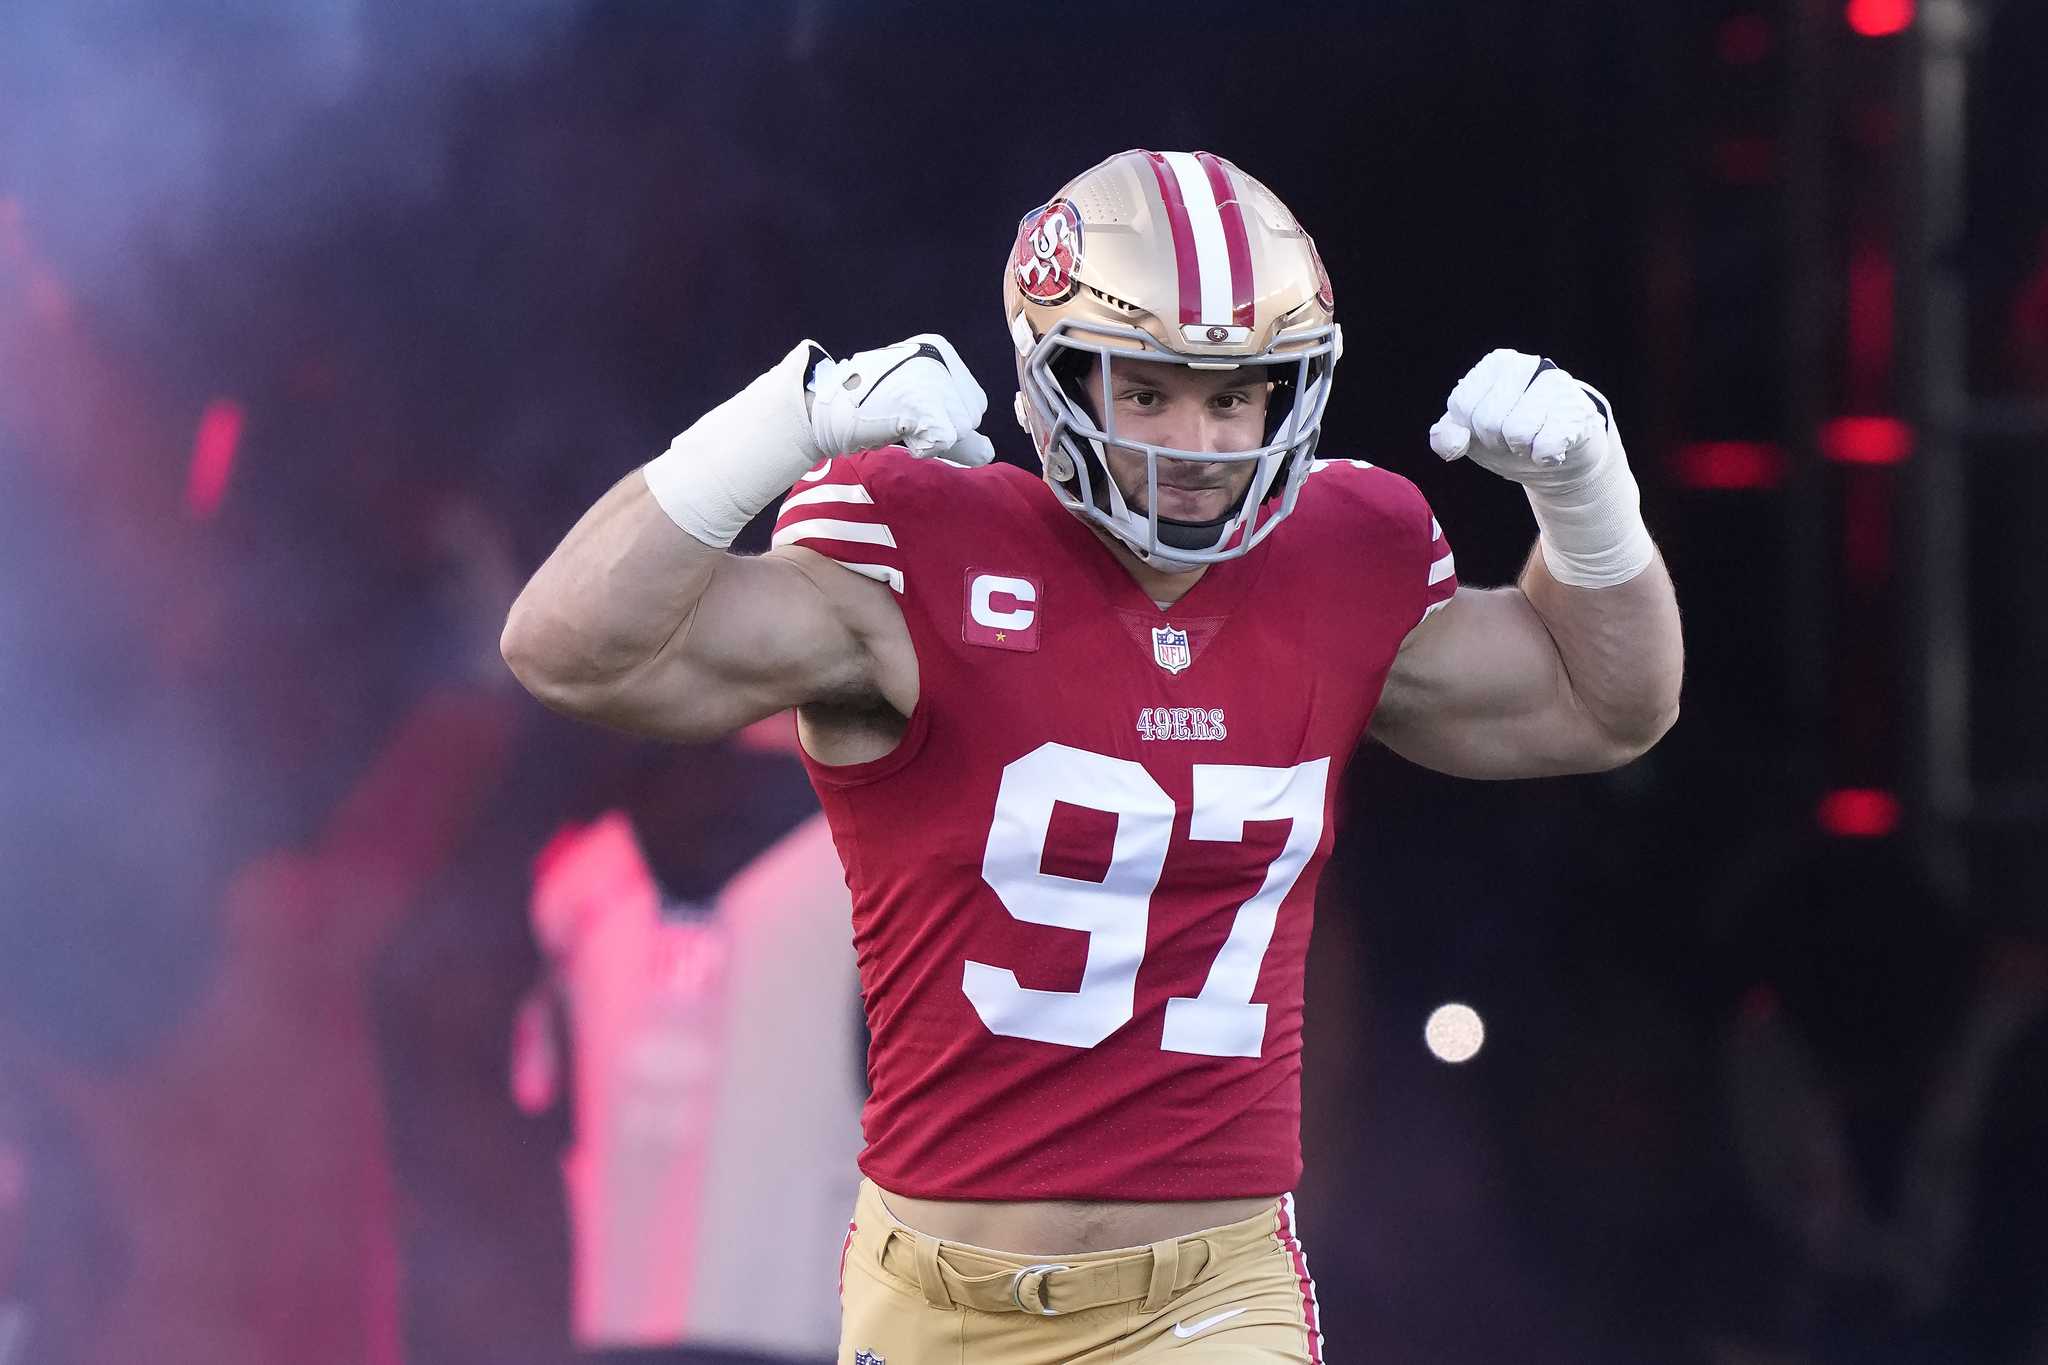 San Francisco 49ers defensive end Nick Bosa is introduced before an NFL game